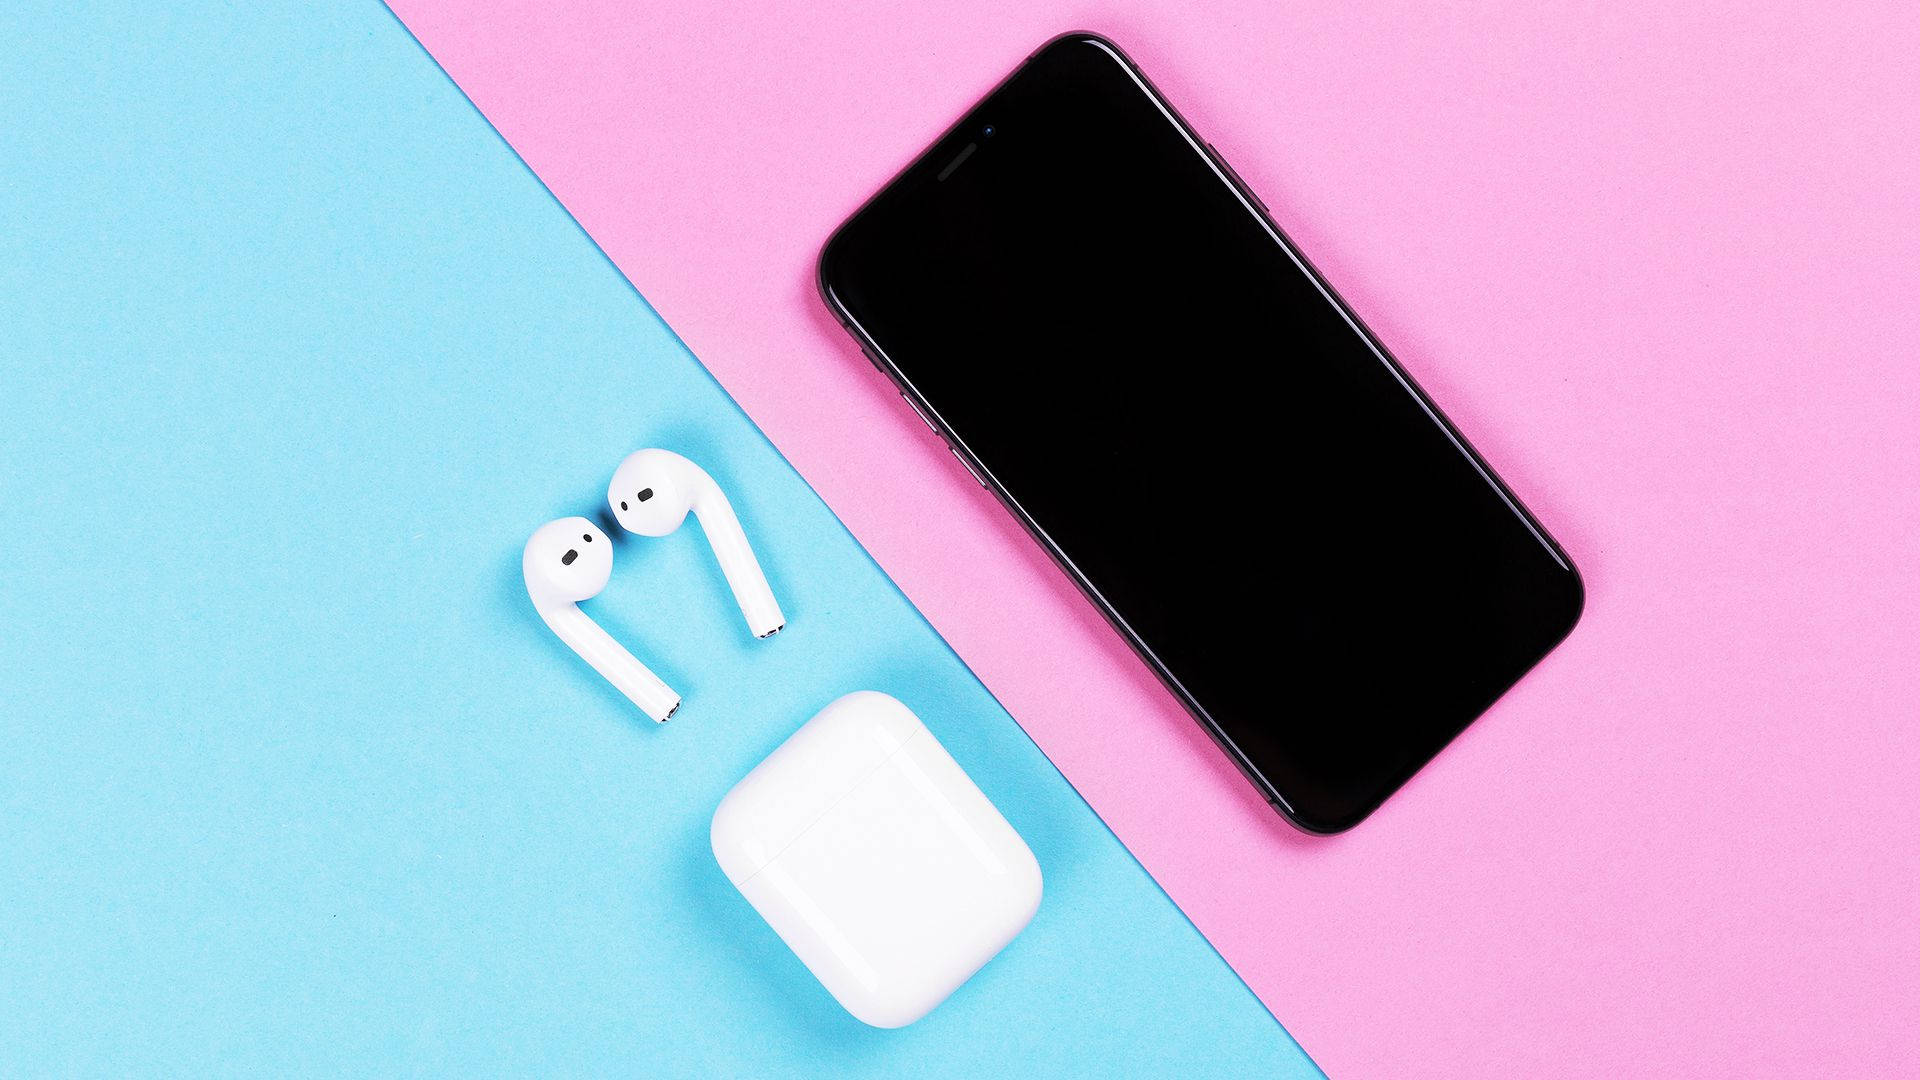 Airpods In Pink & Blue Background